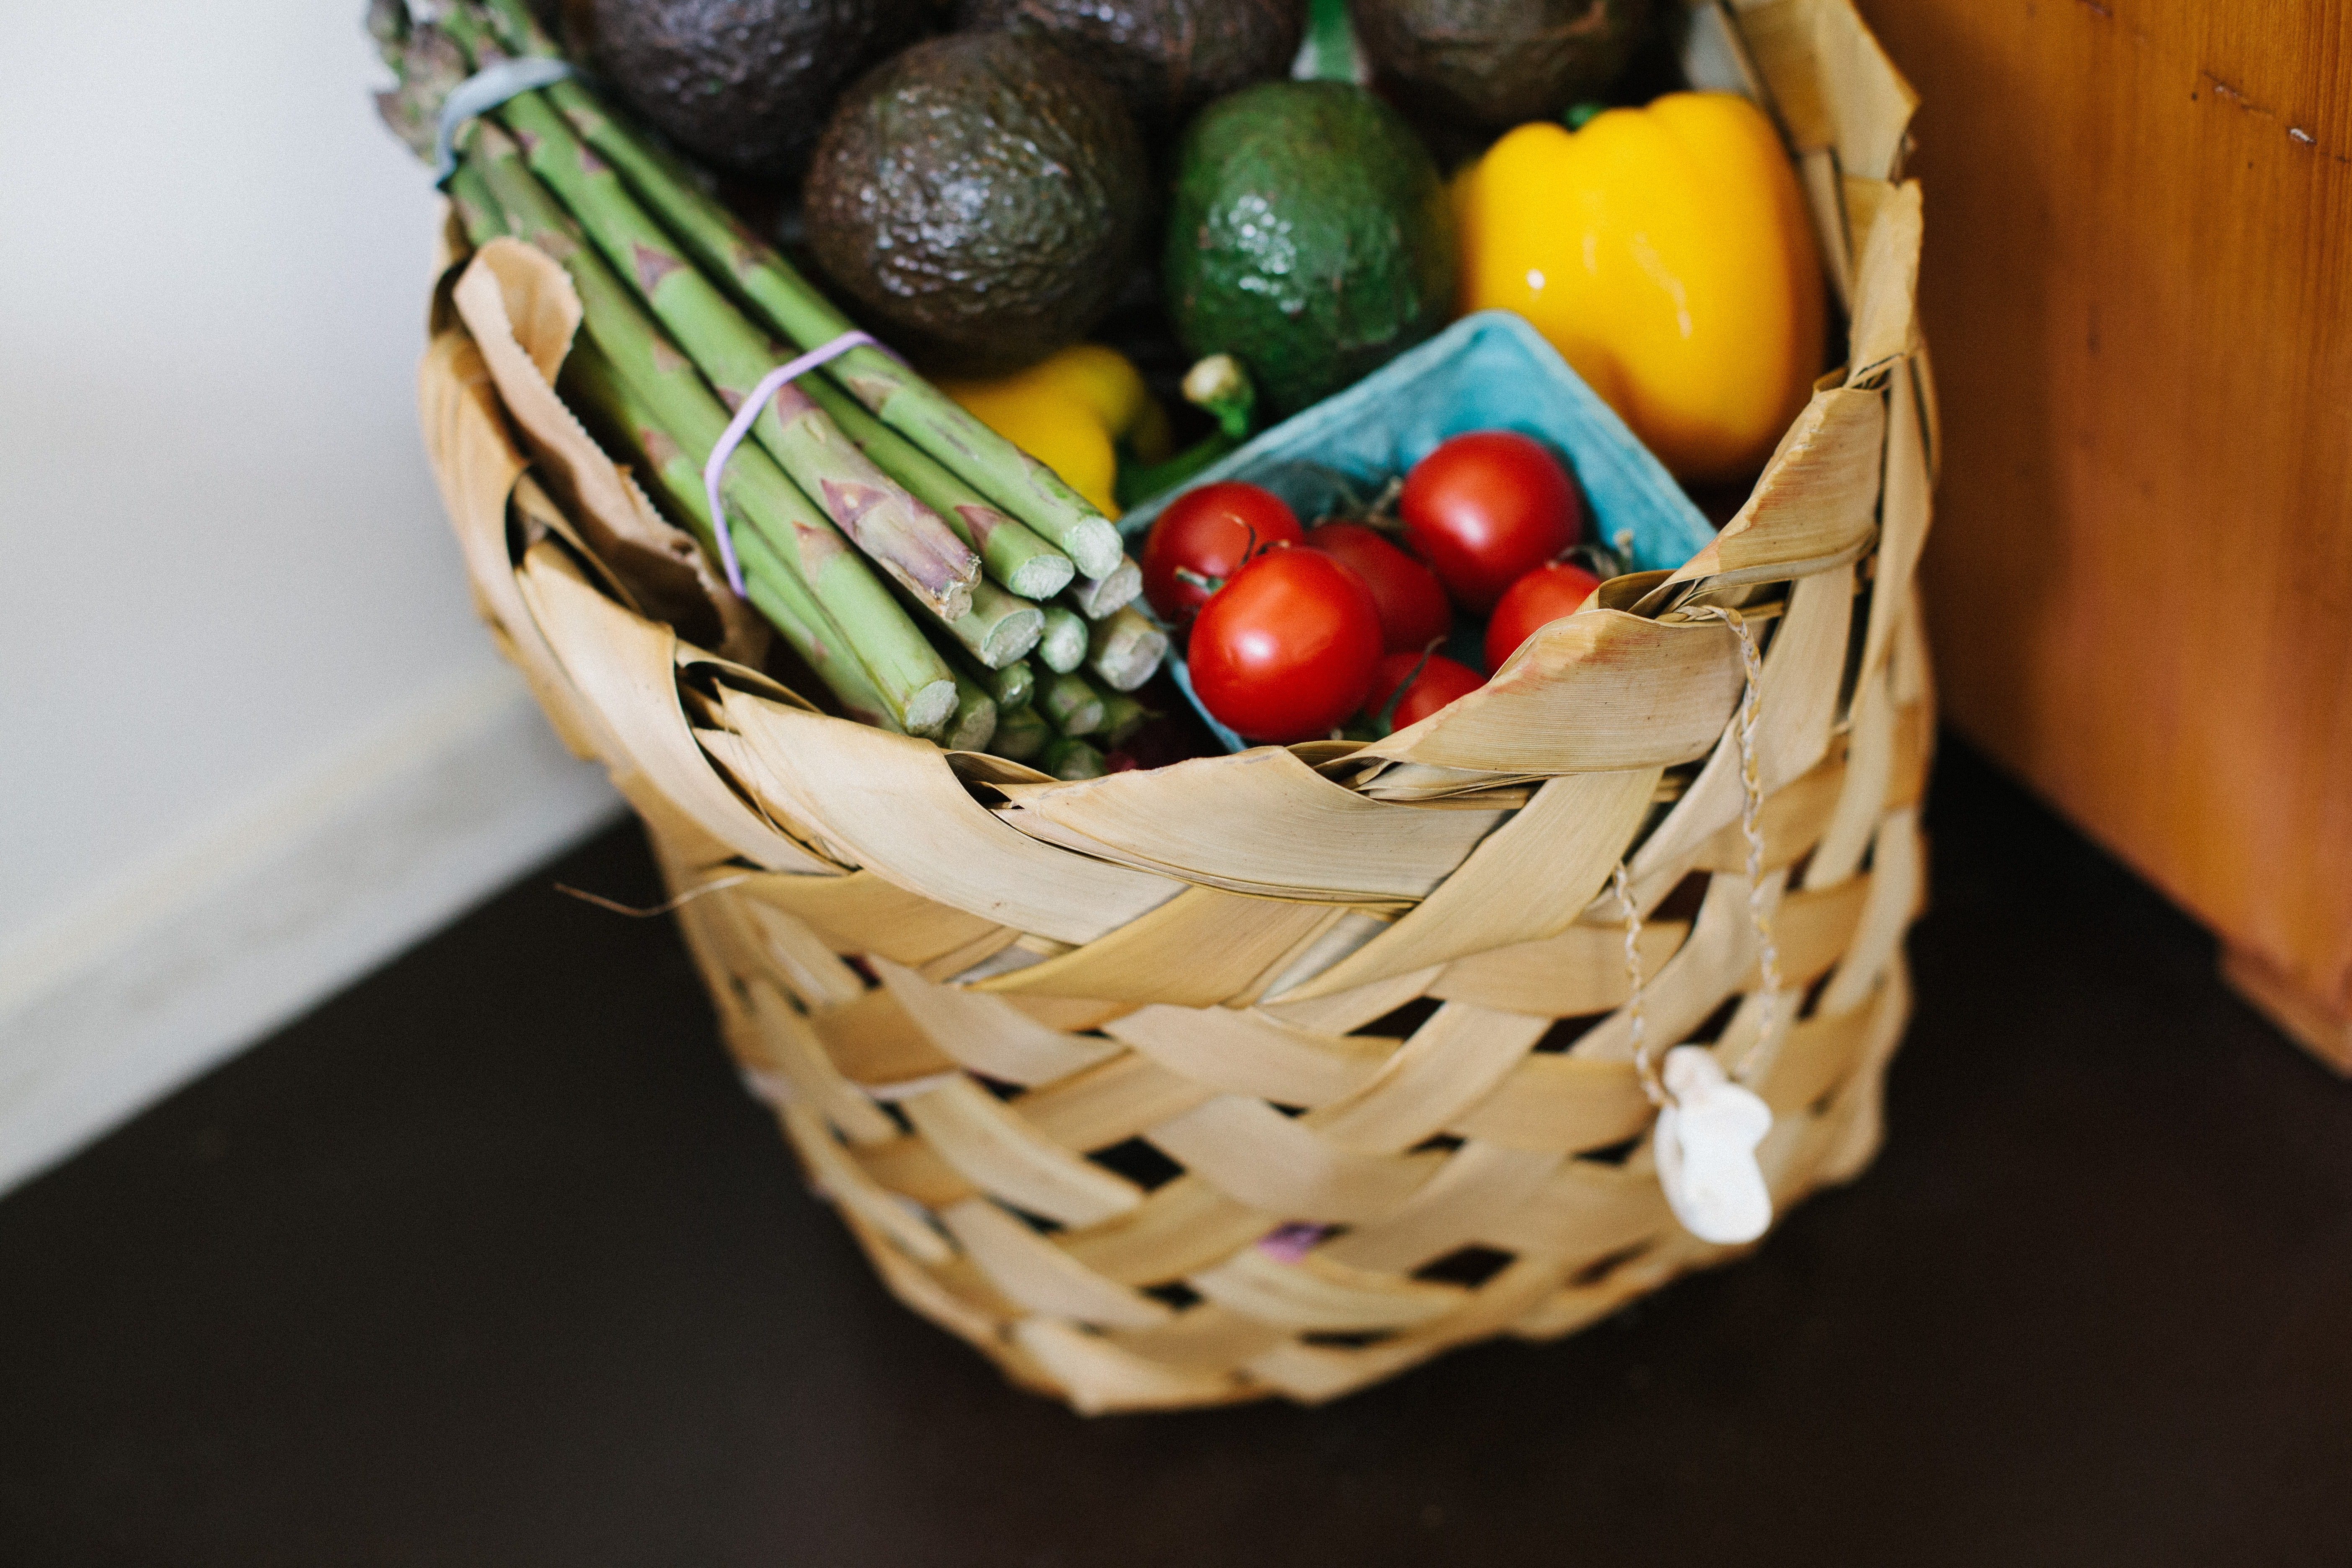 Fruit and vegetables in a wicker basket